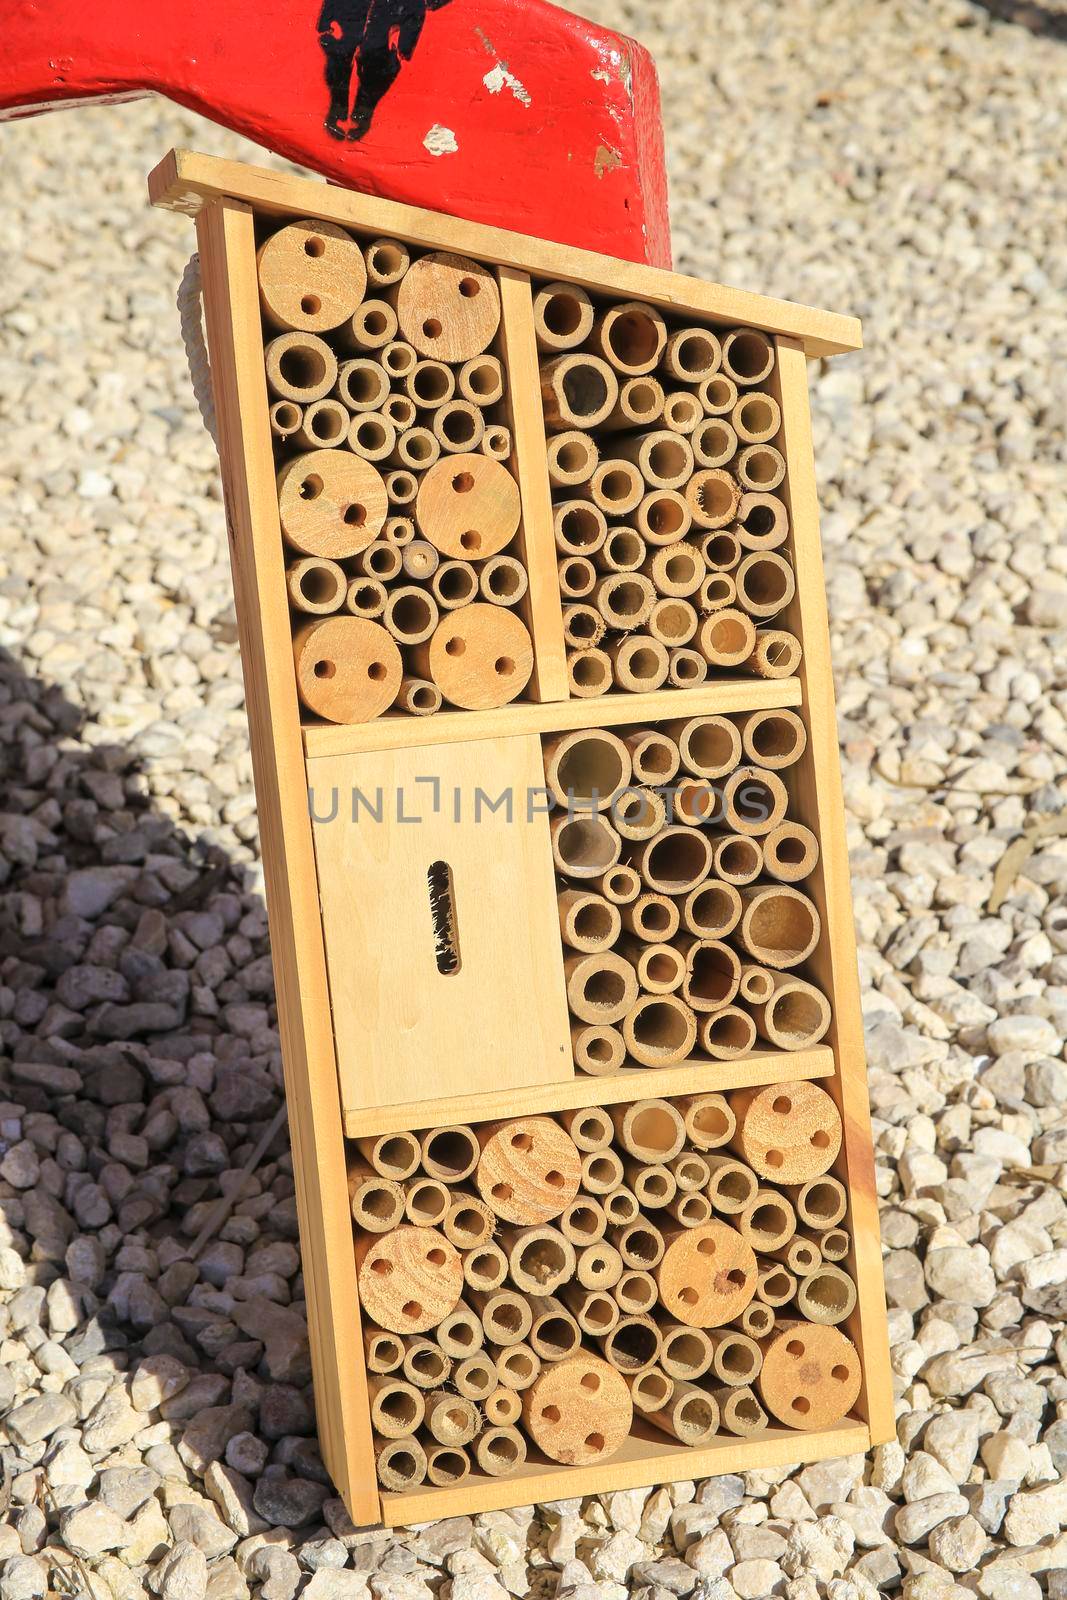 Insect hotel for sale at a market stall by soniabonet